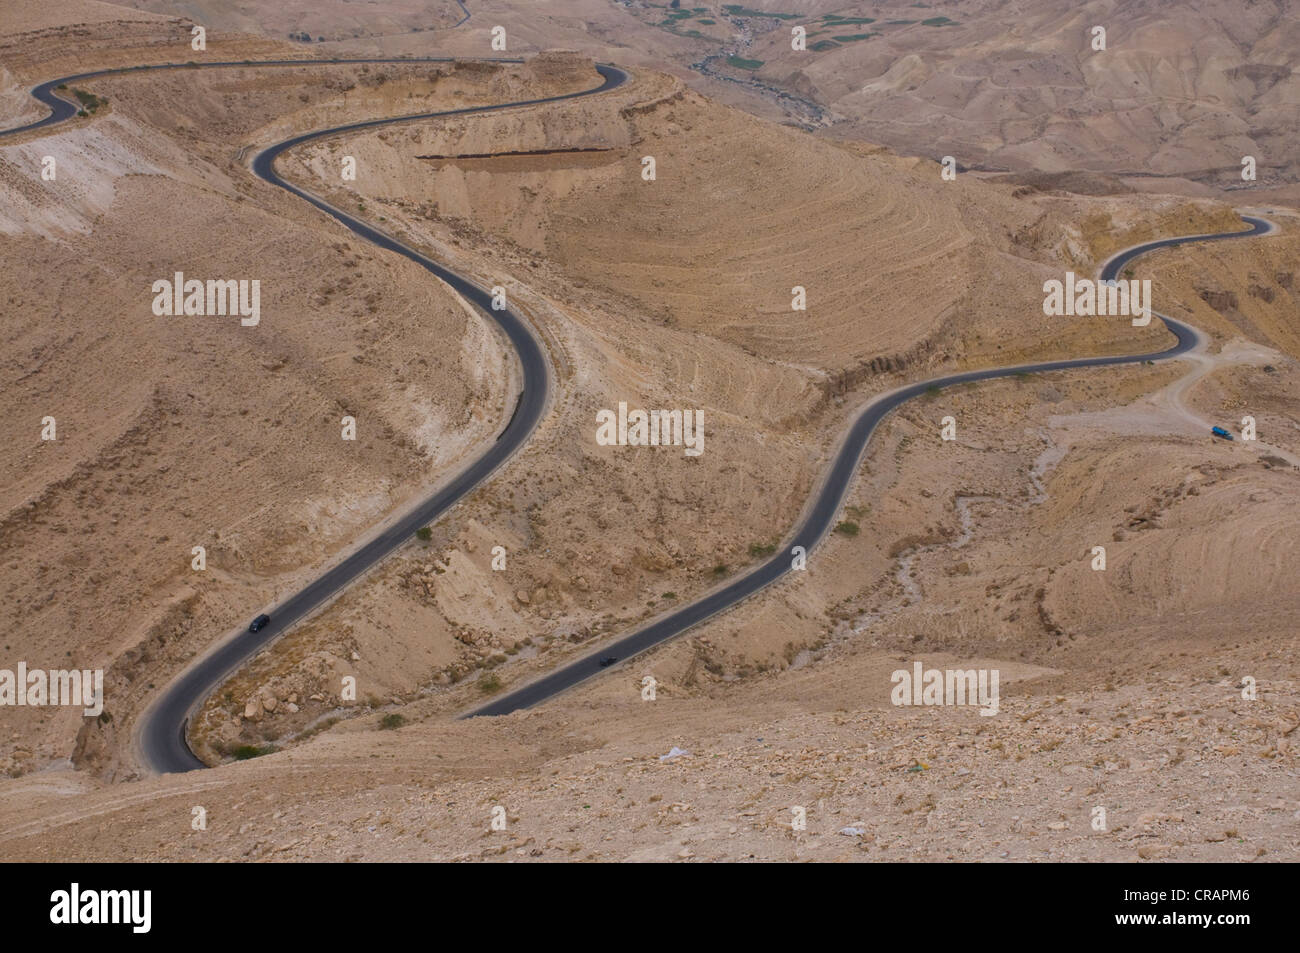 Winding road in King's Canyon, Jordan, Middle East Stock Photo